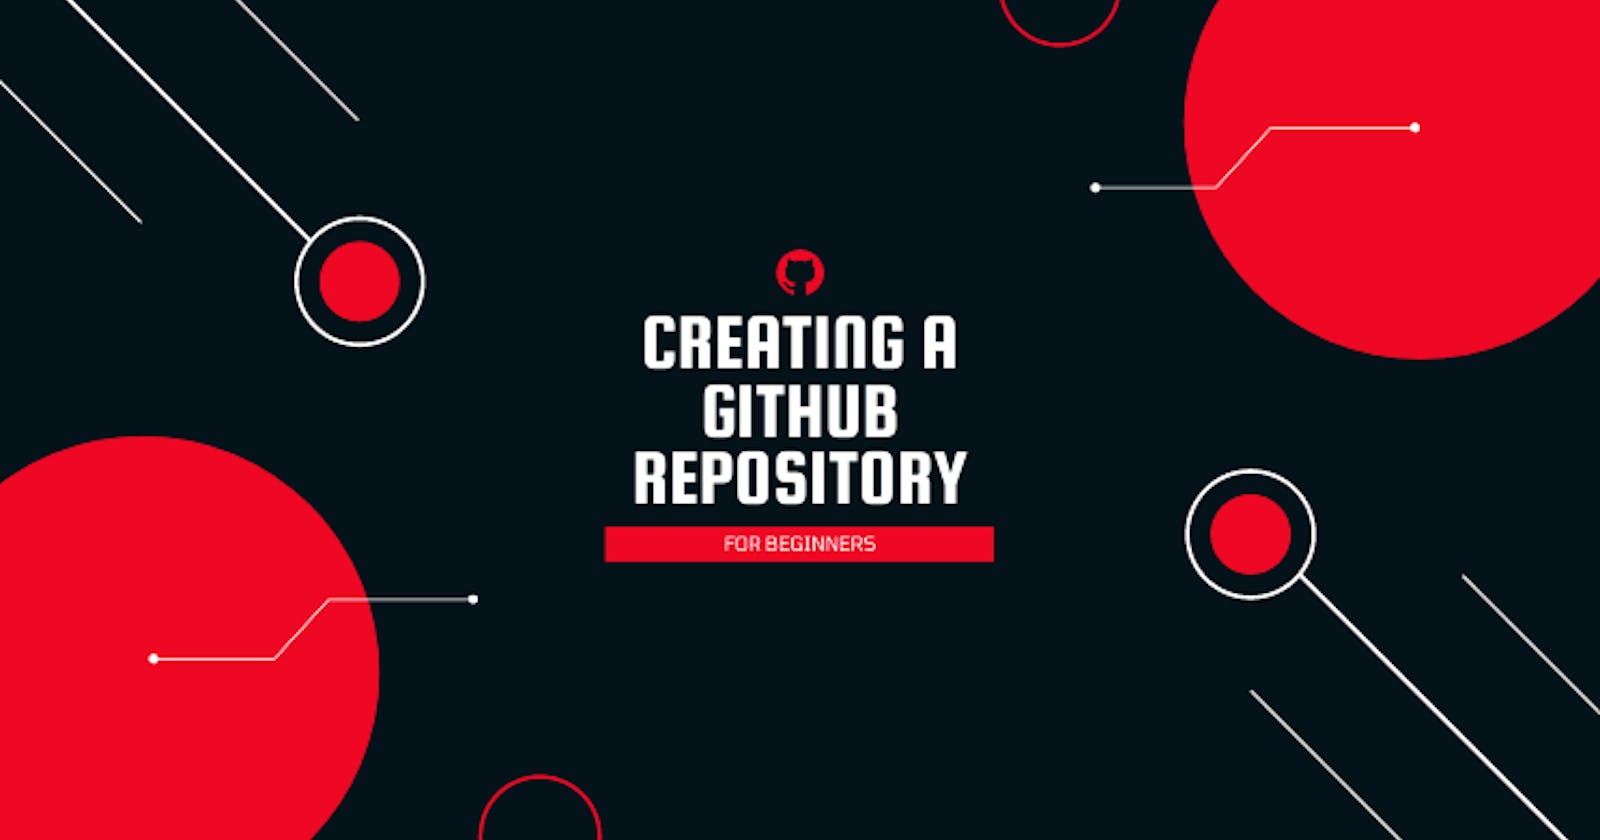 GitHub 101: Uploading Files to a New Repository via Command Line